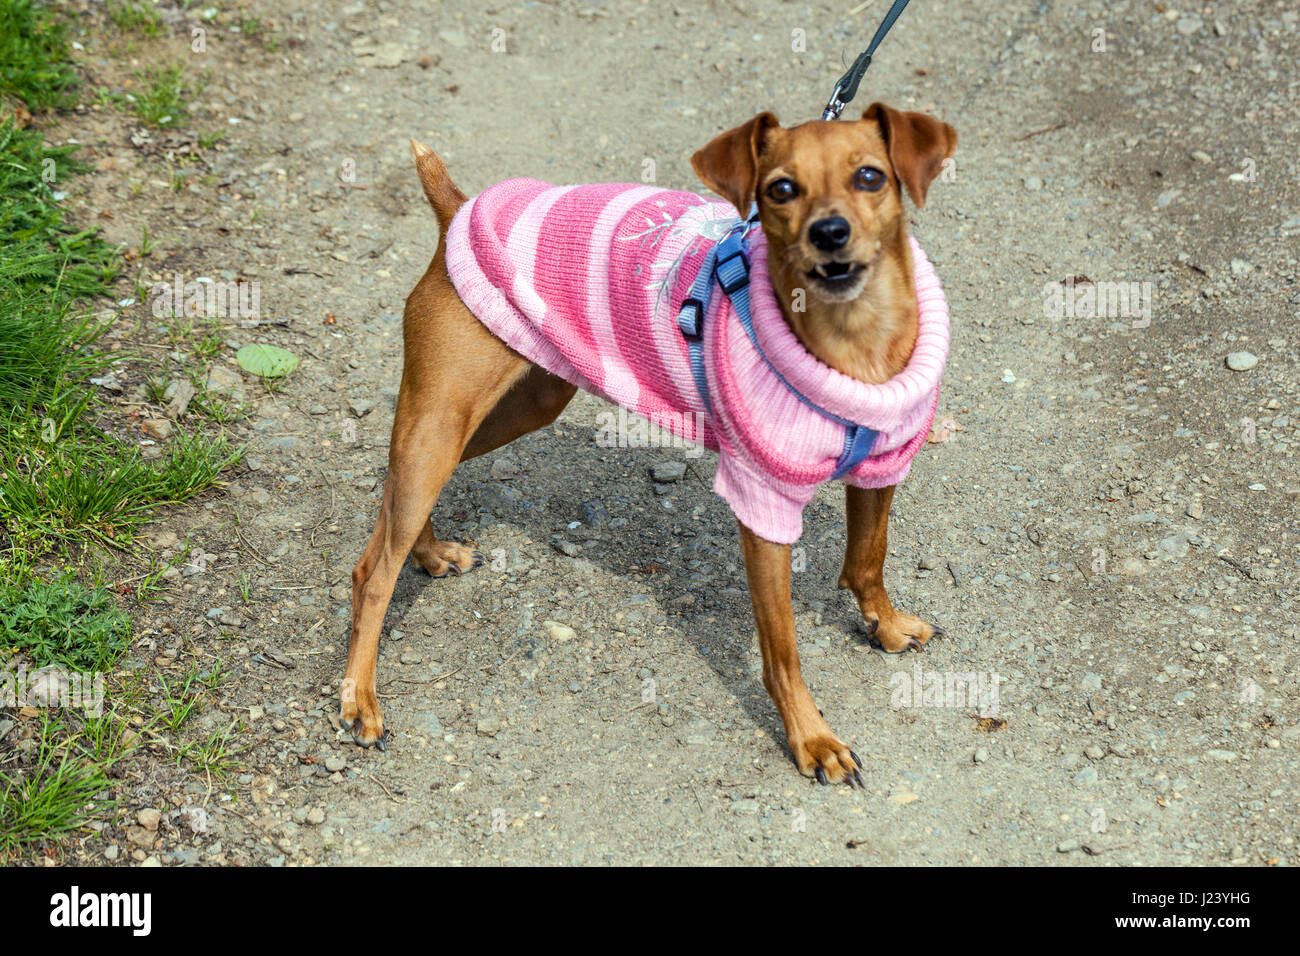 An angry dog on a leash in a pink suit dog in suit Stock Photo